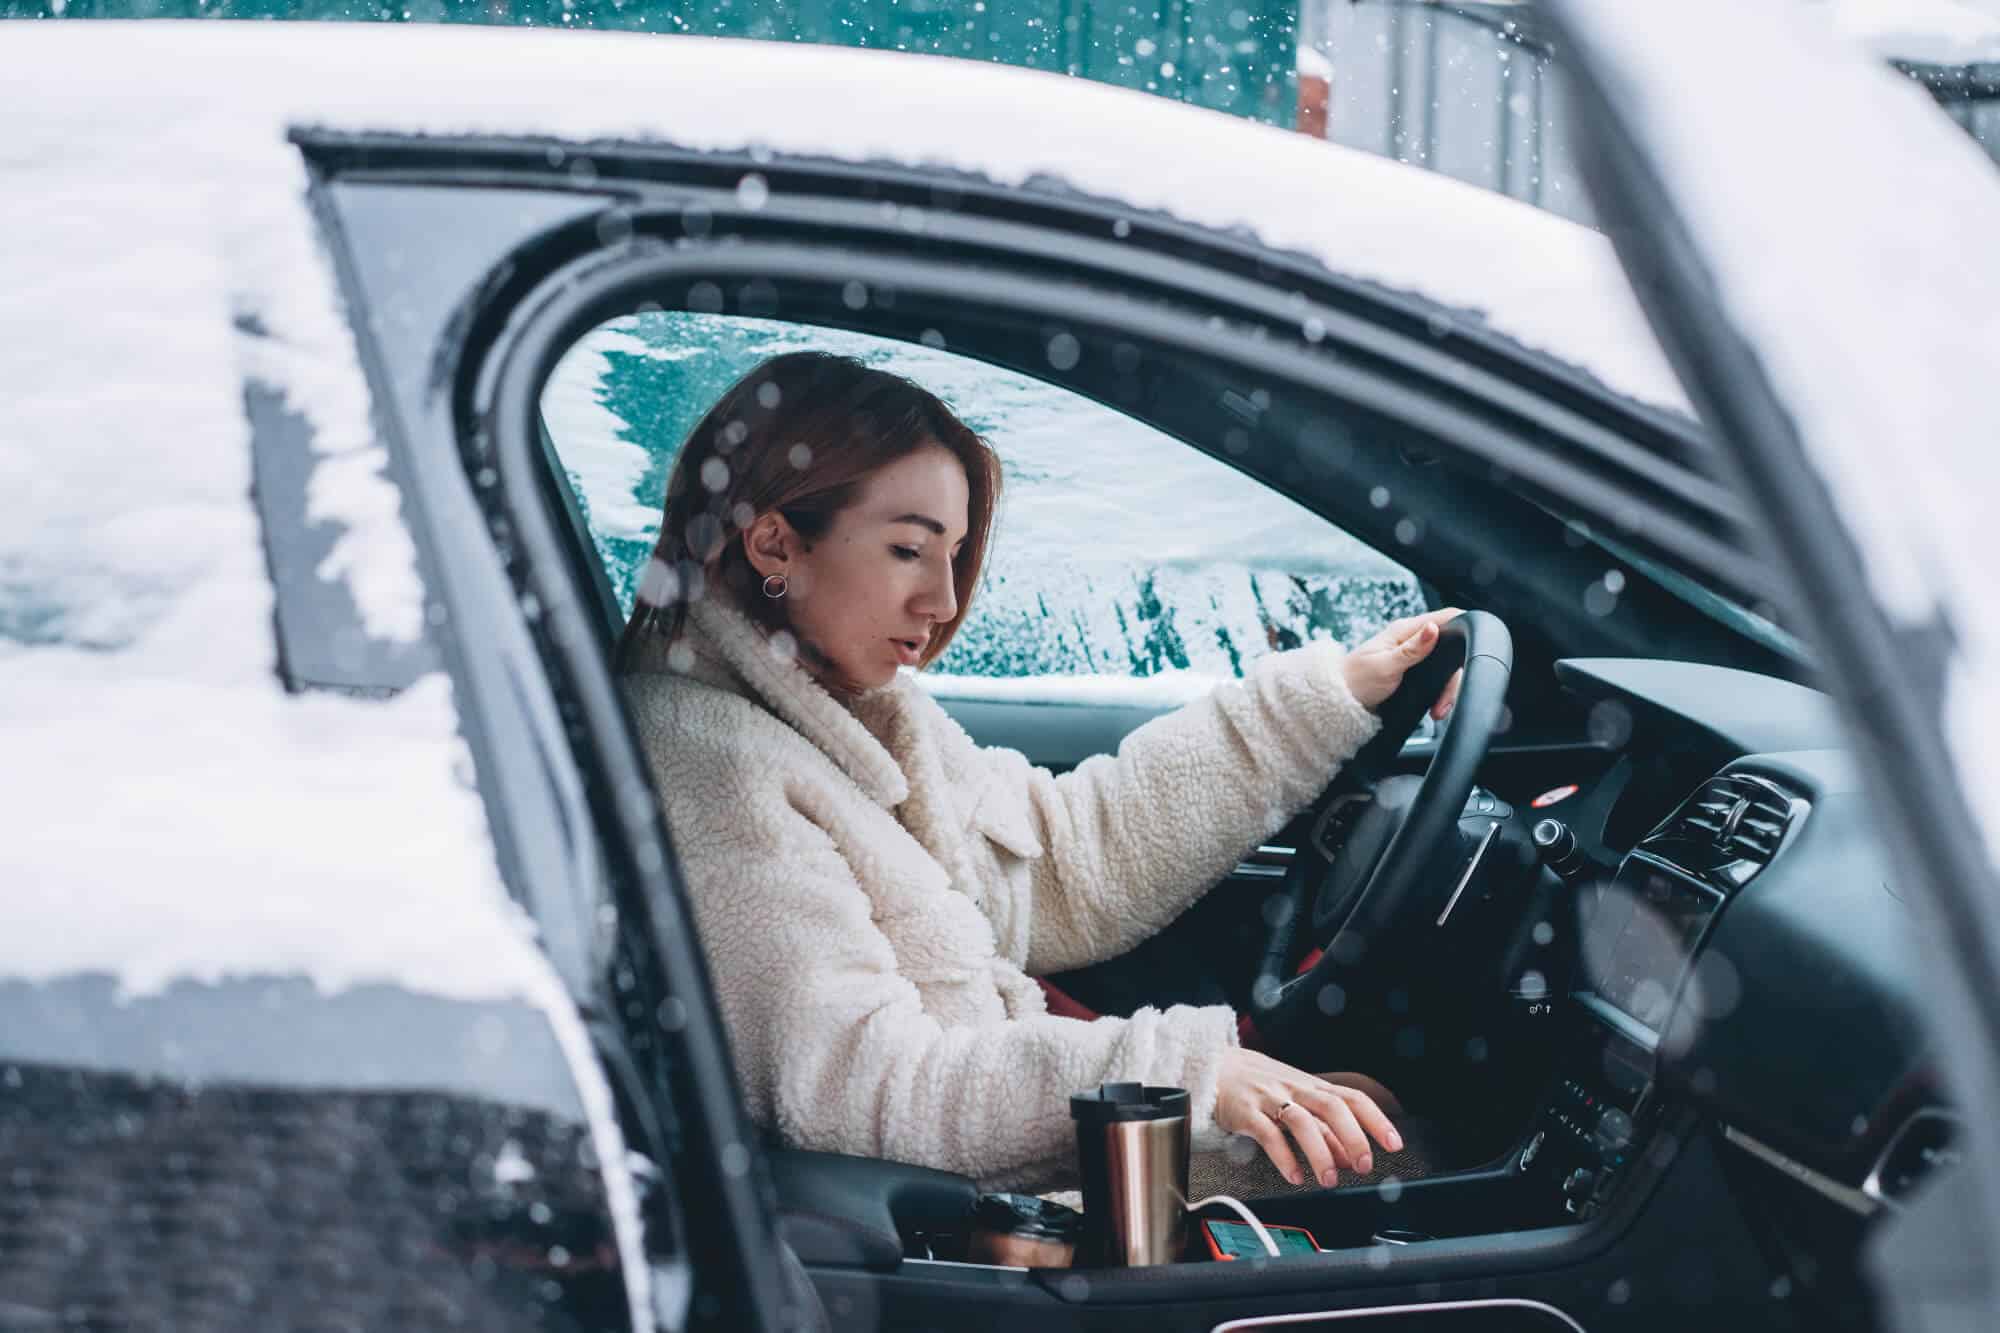 Should You Warm Up Your Car’s Engine Before Driving in the Cold